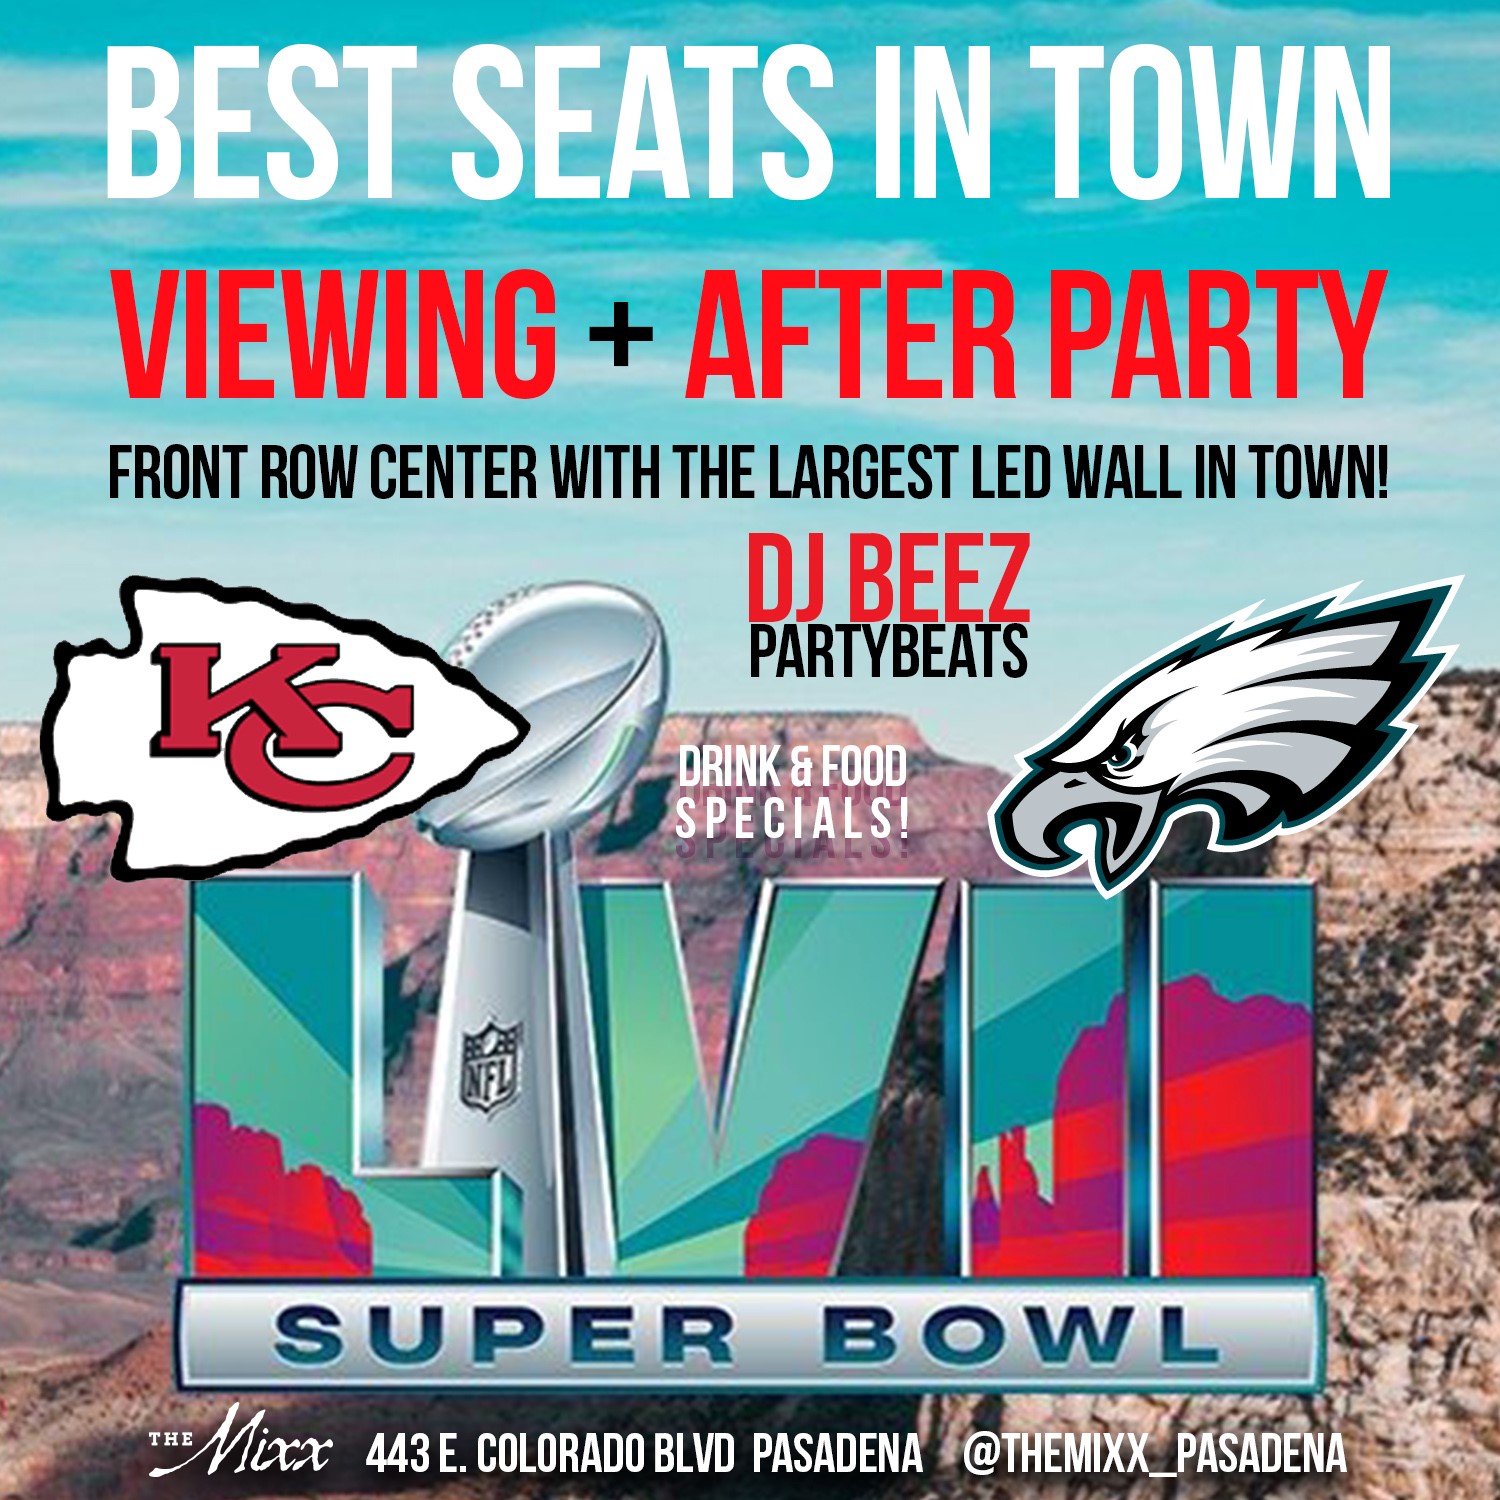 You are currently viewing SUPERBOWL viewing & After Party